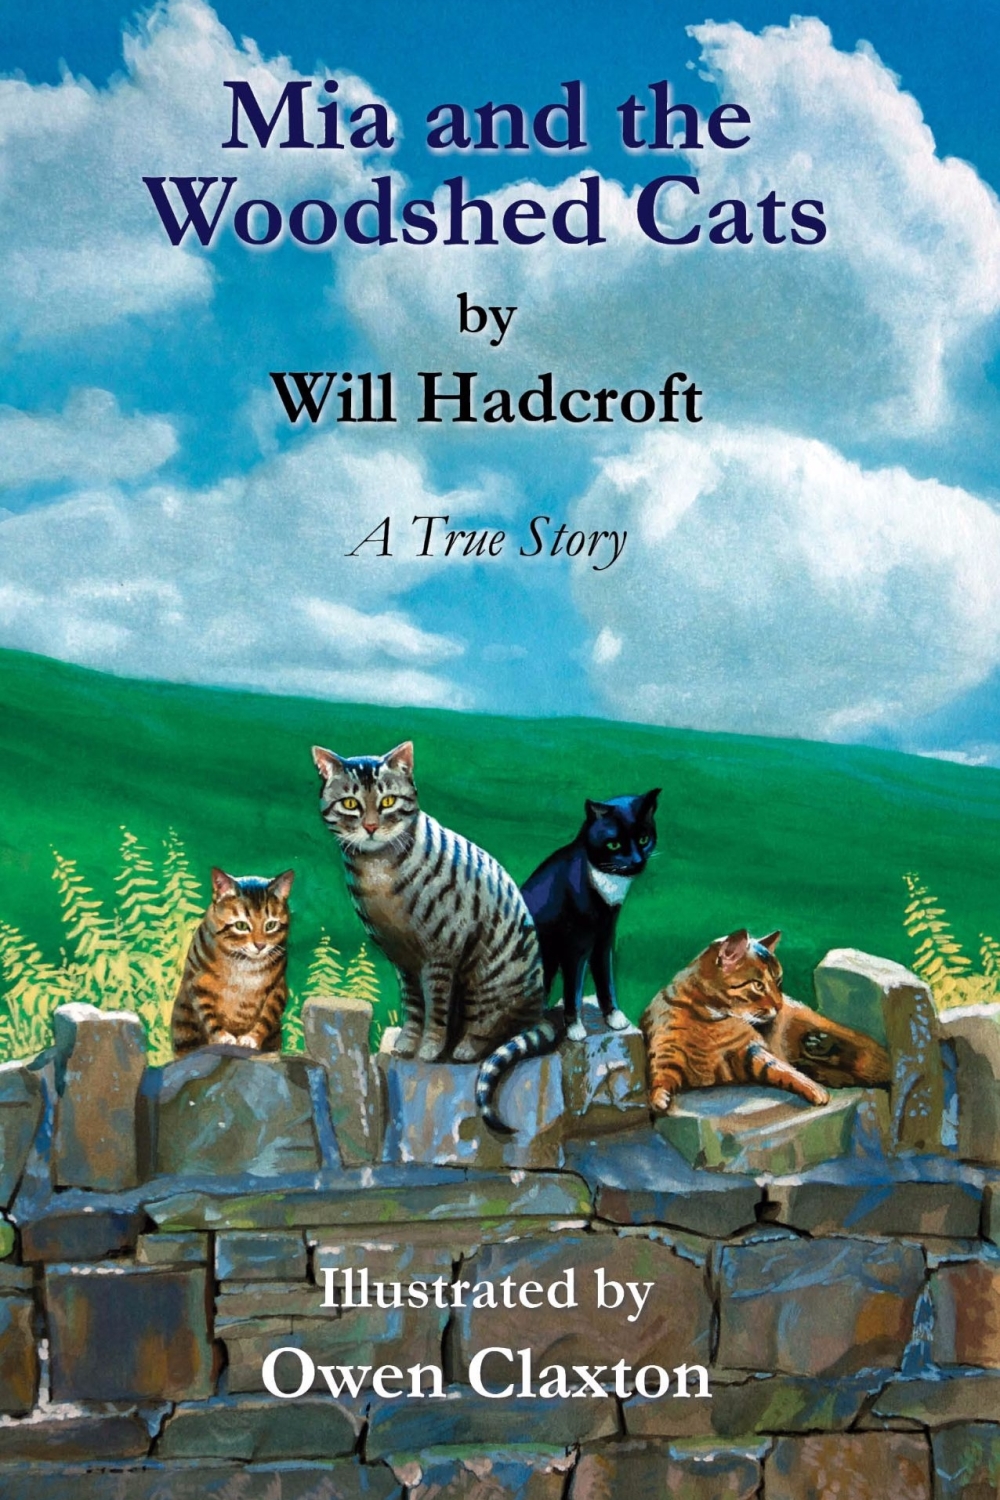 Mia and the Woodshed Cats (Book 1 of The Mia Books) £1 off RRP!